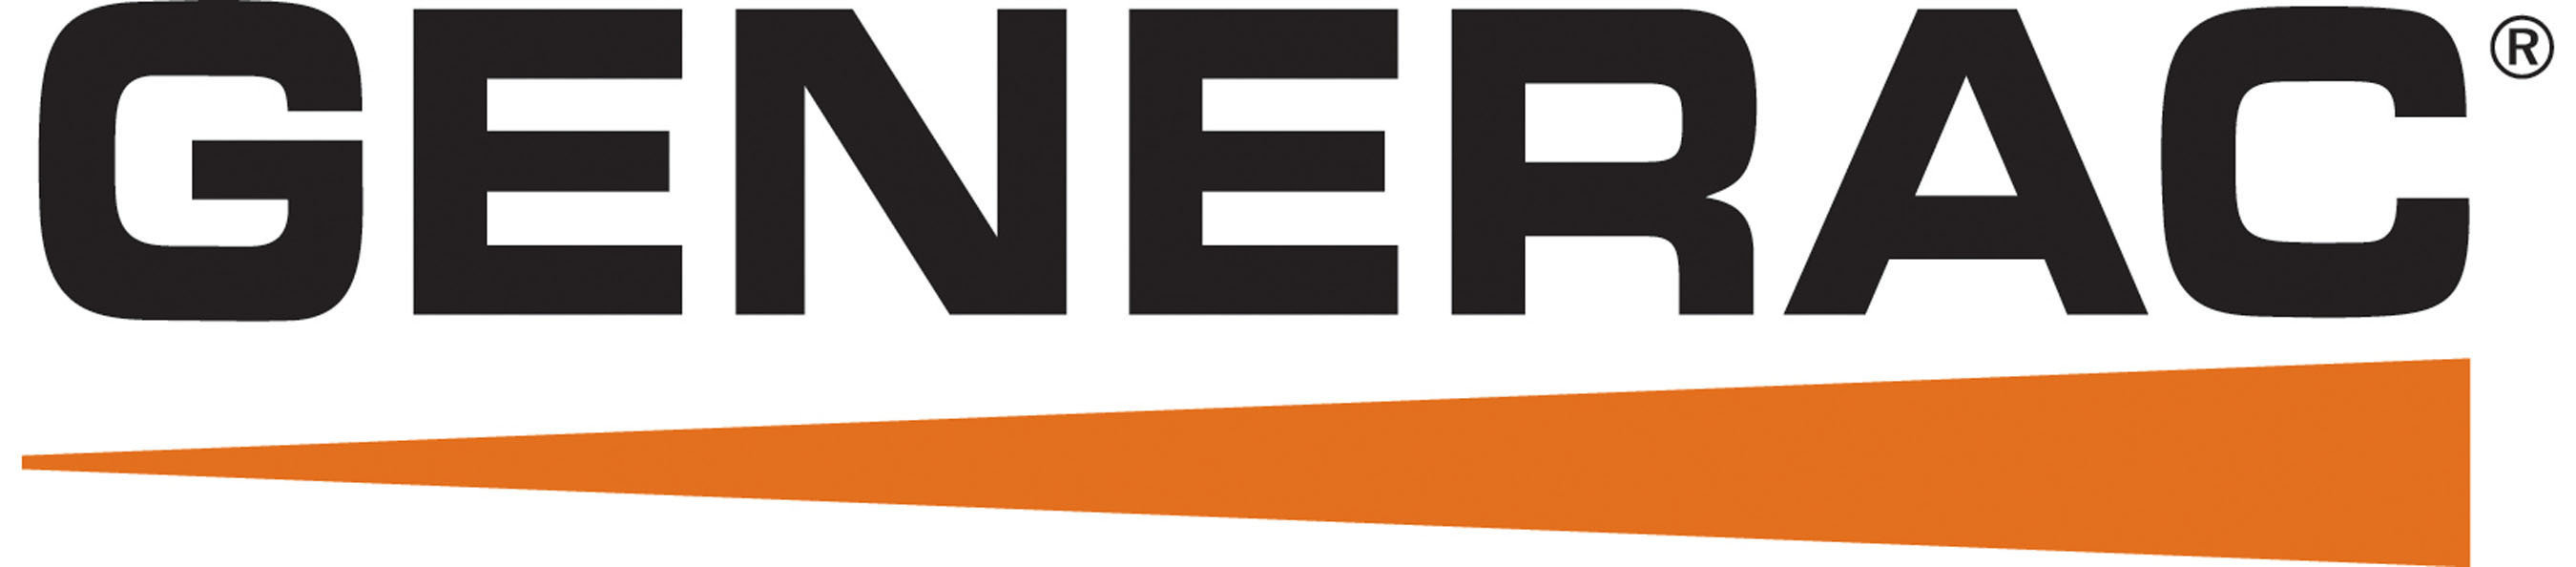 Generac is a leading manufacturer of generators and provides a broad range of power solutions